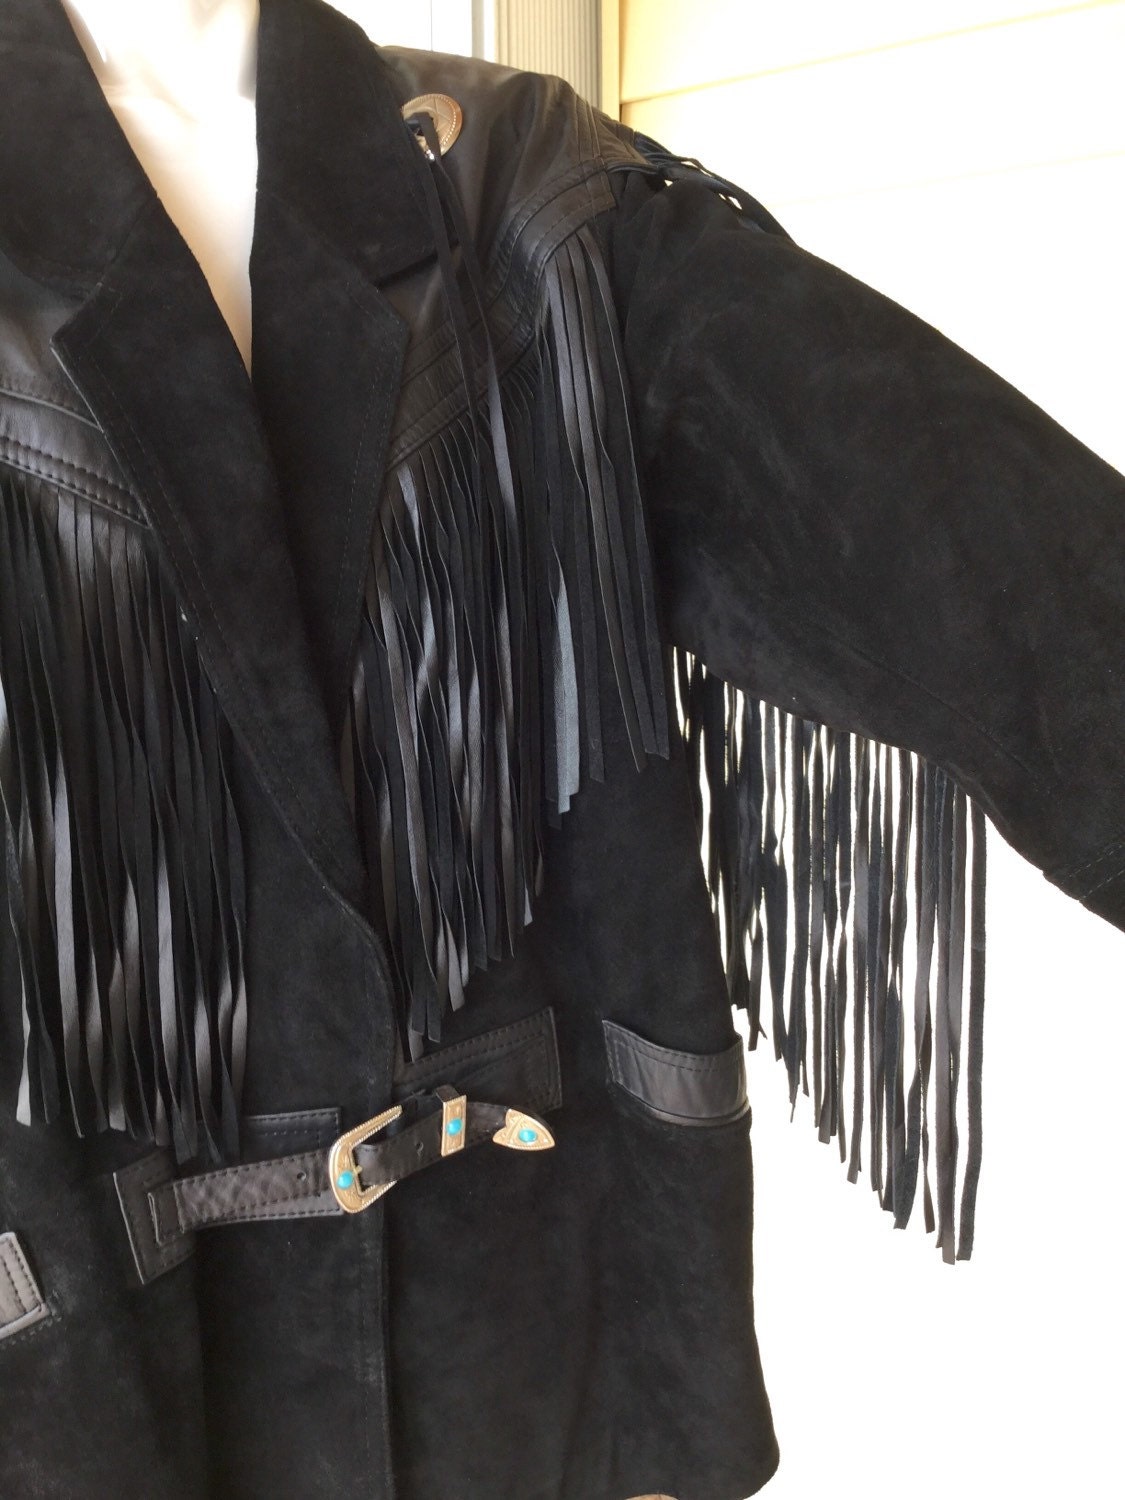 Leather and suede fringed coat by DesignsbyDDT on Etsy